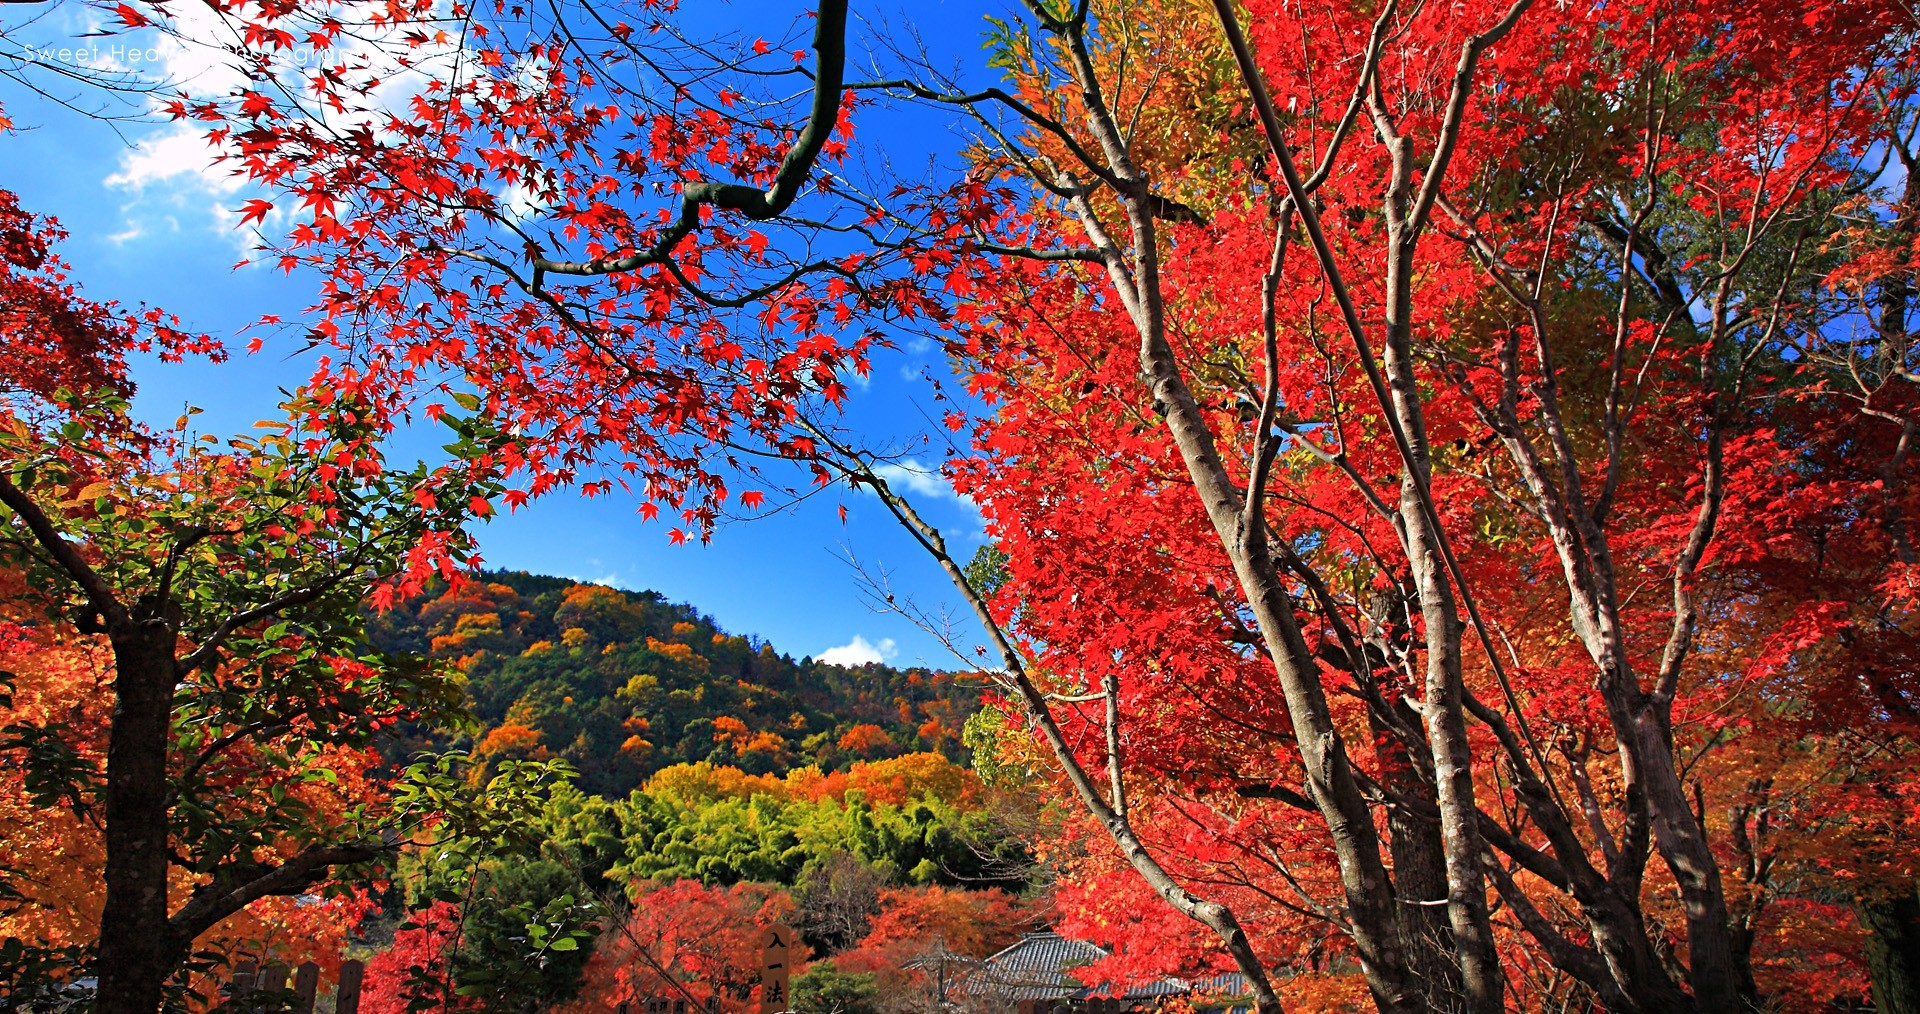 General 1920x1014 maple leaves fall trees hills red nature landscape